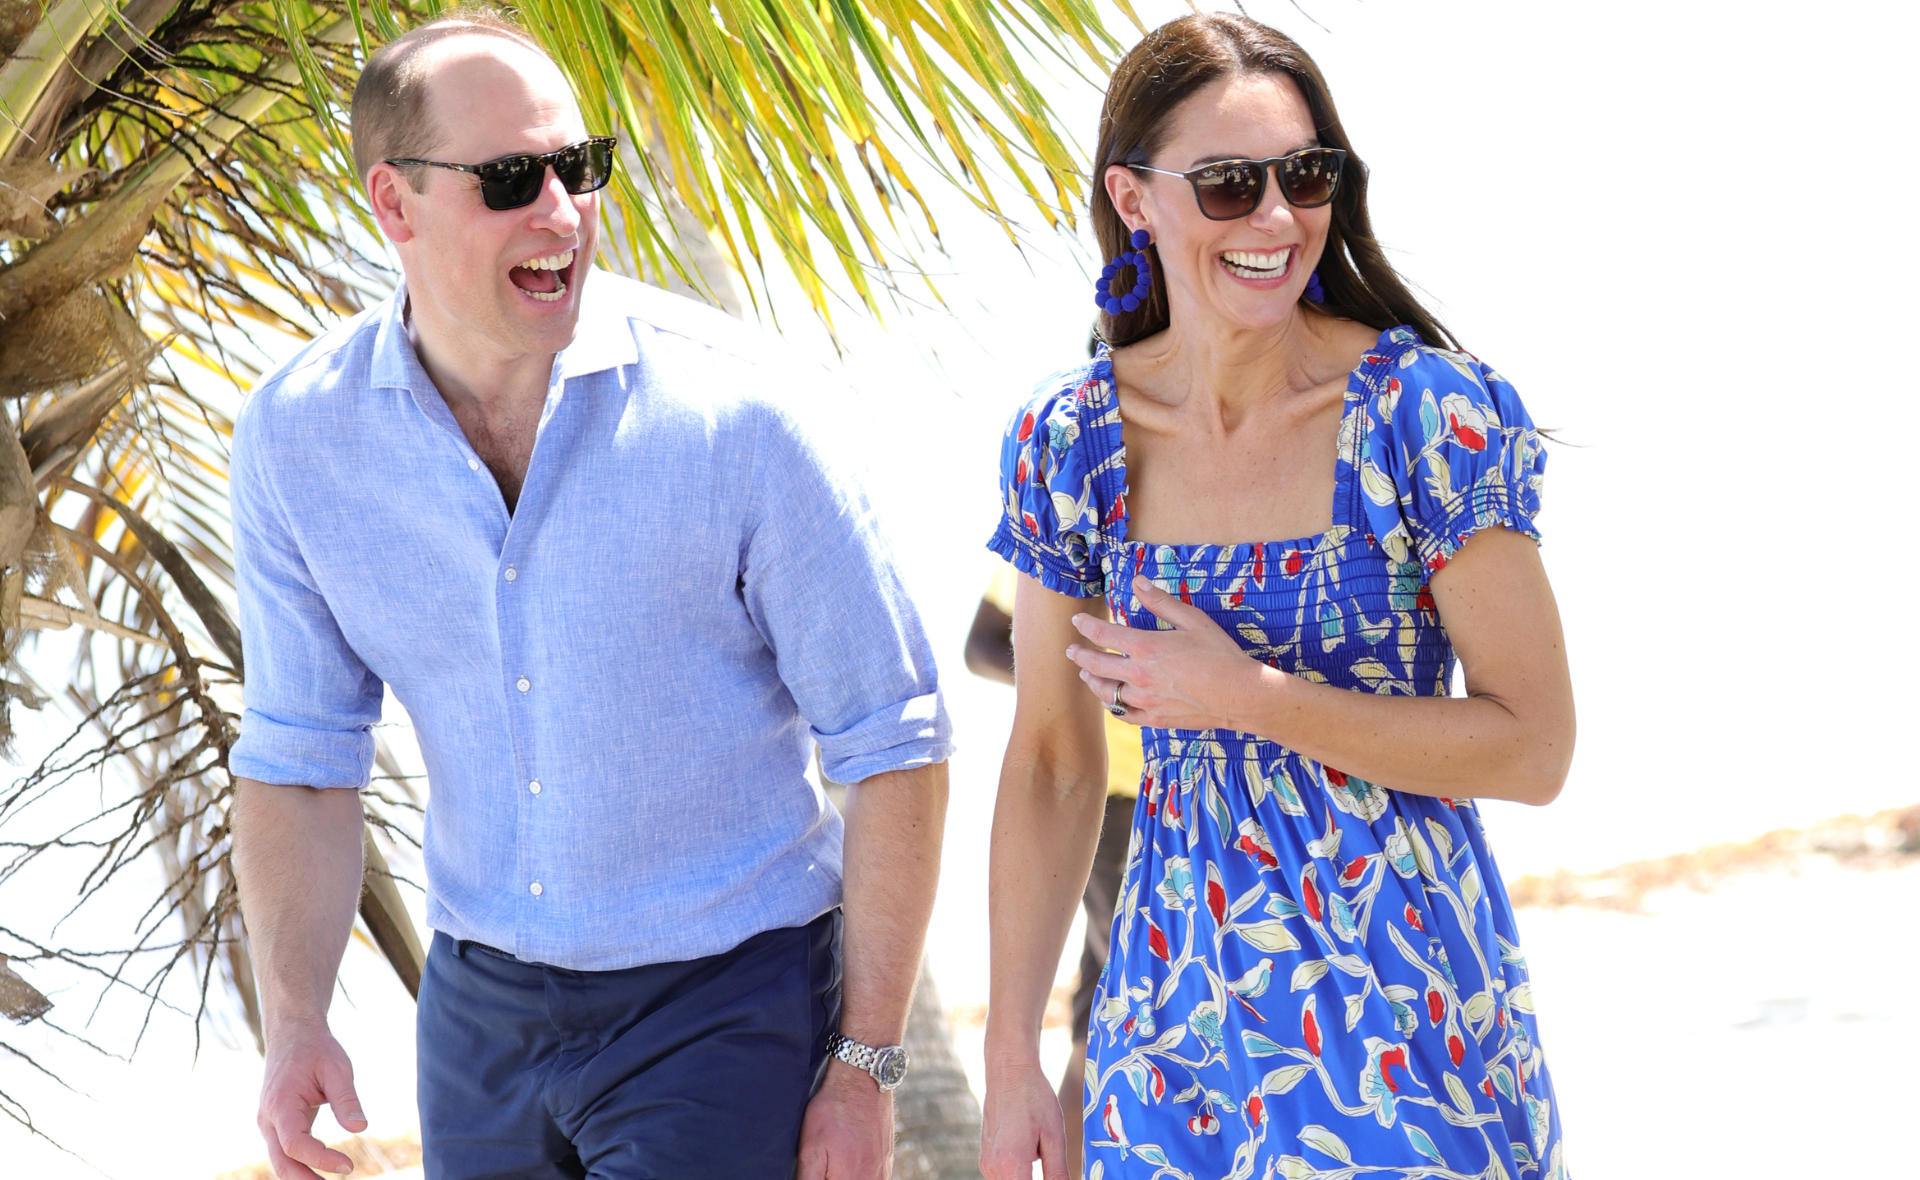 Prince William and Kate Middleton jet off on holiday amid Harry’s allegations